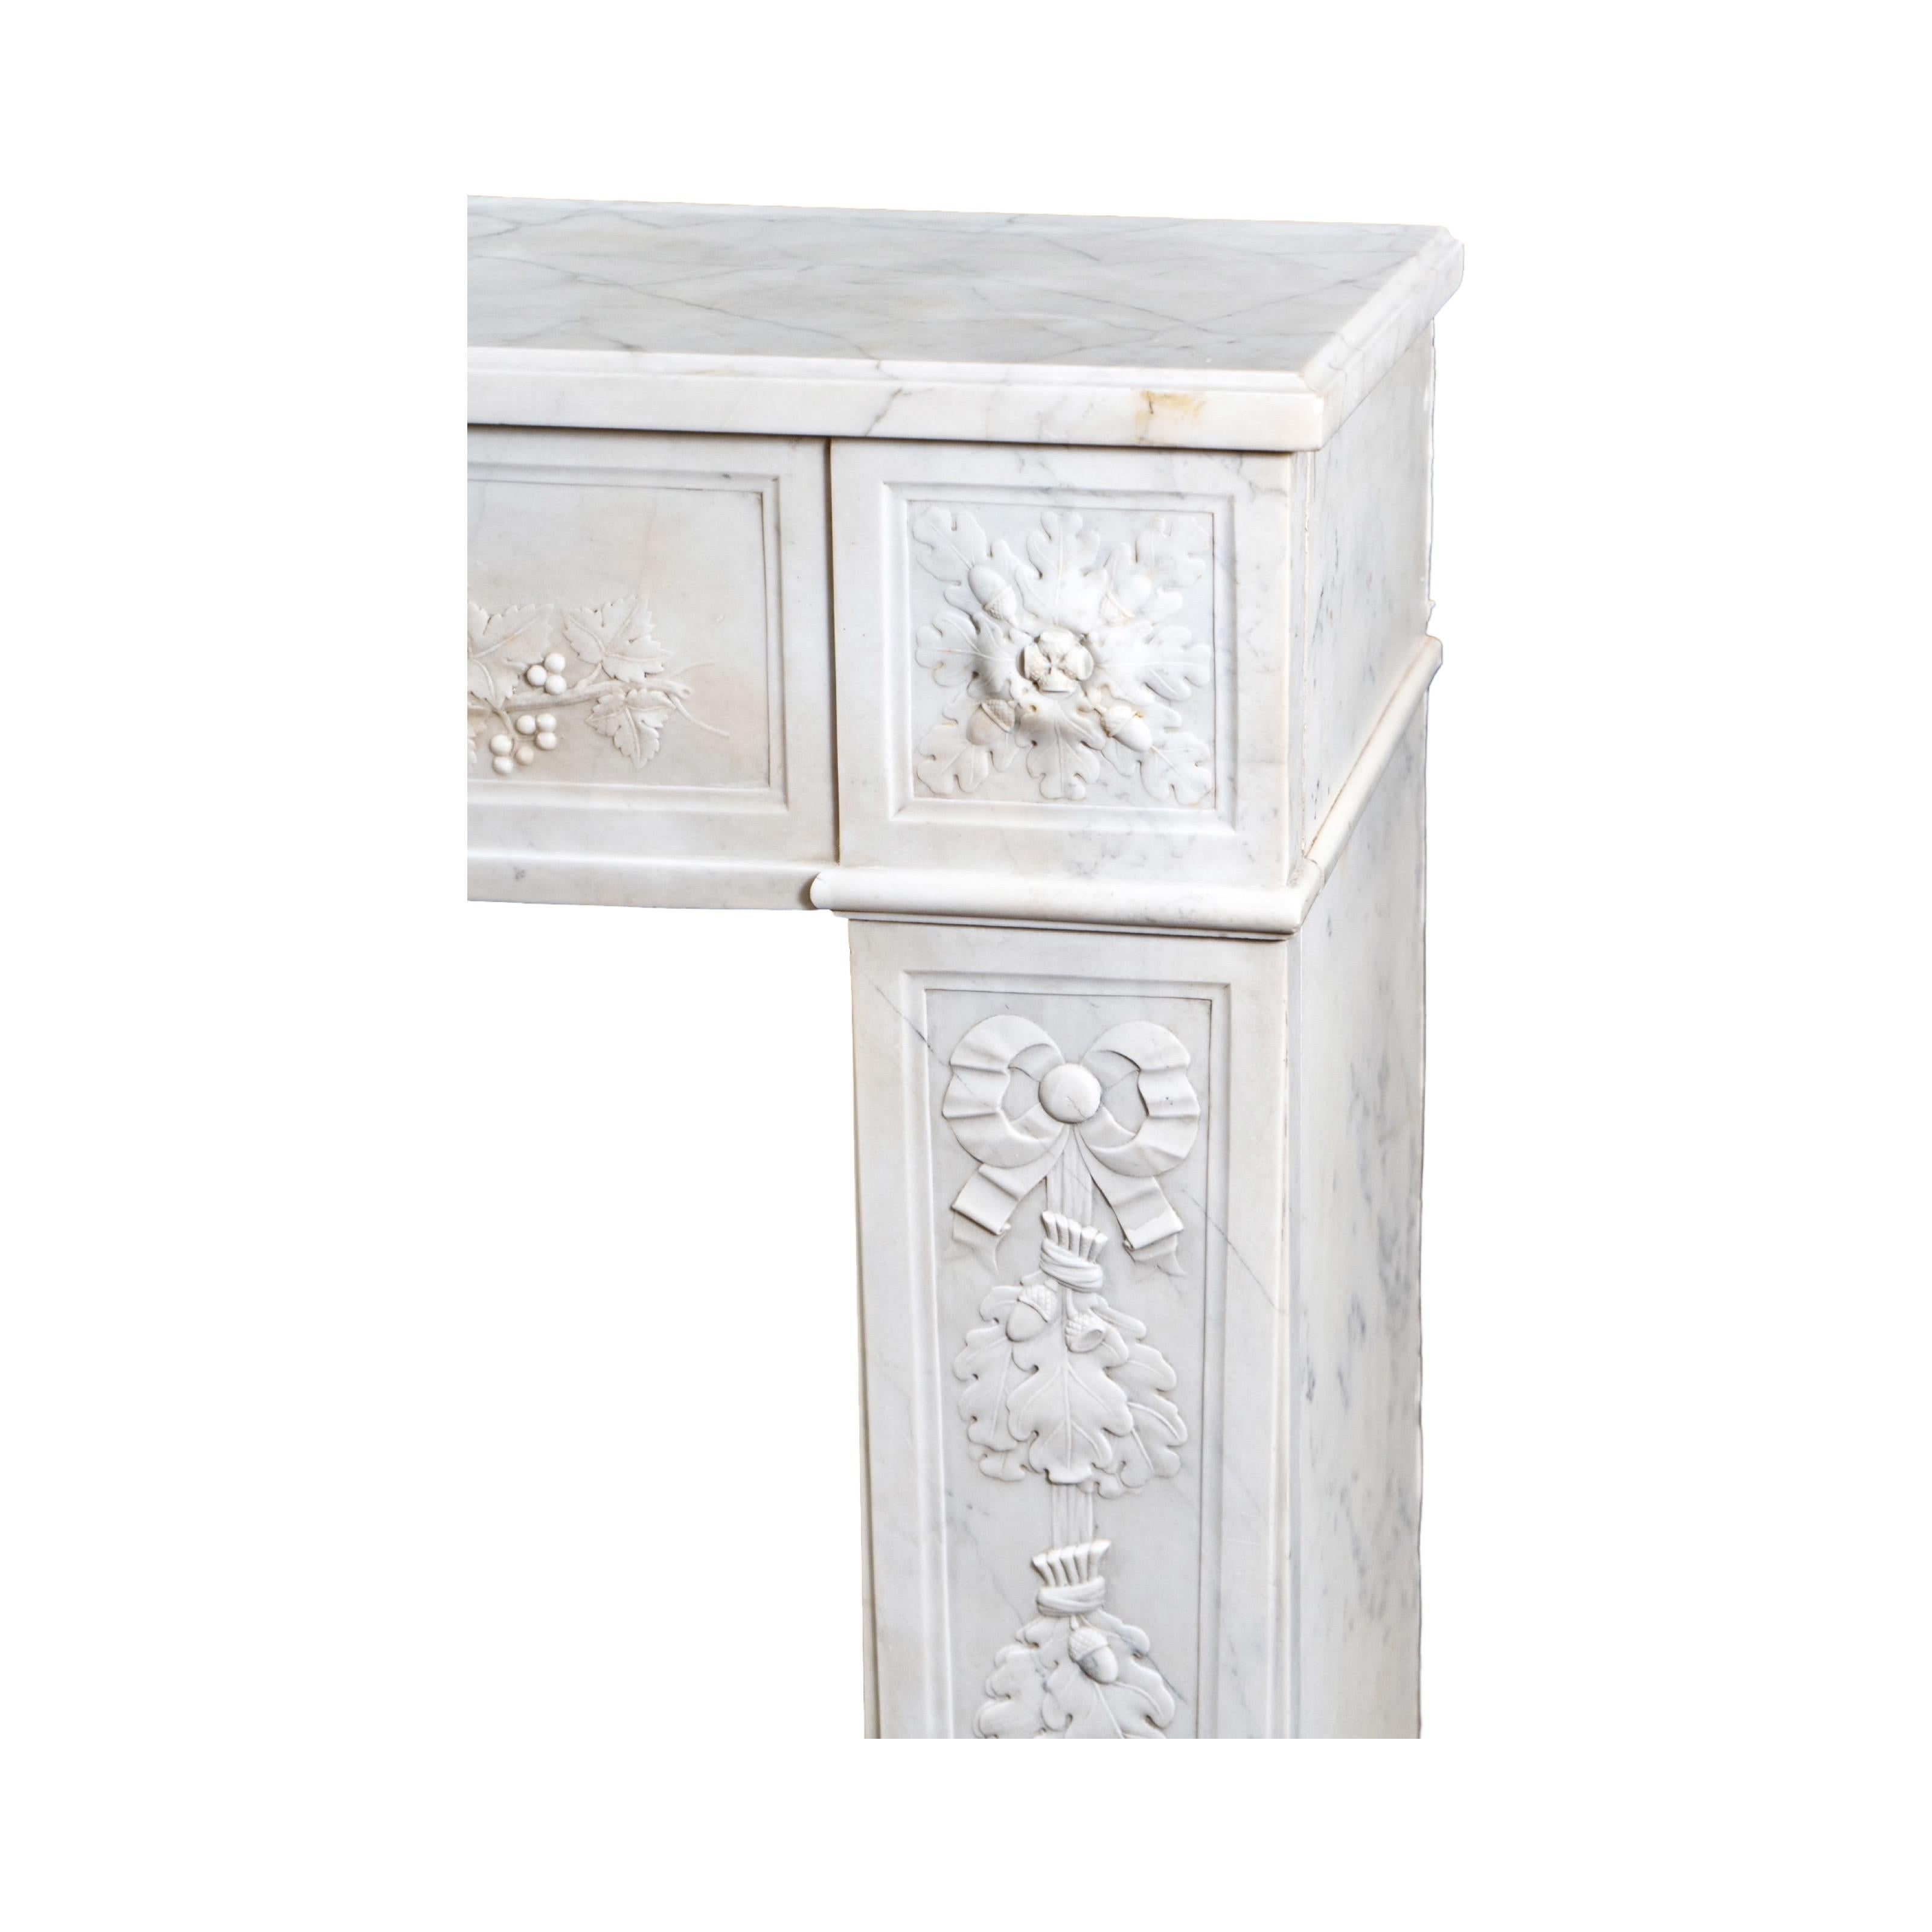 19th Century French White Veined Carrara Marble Mantel For Sale